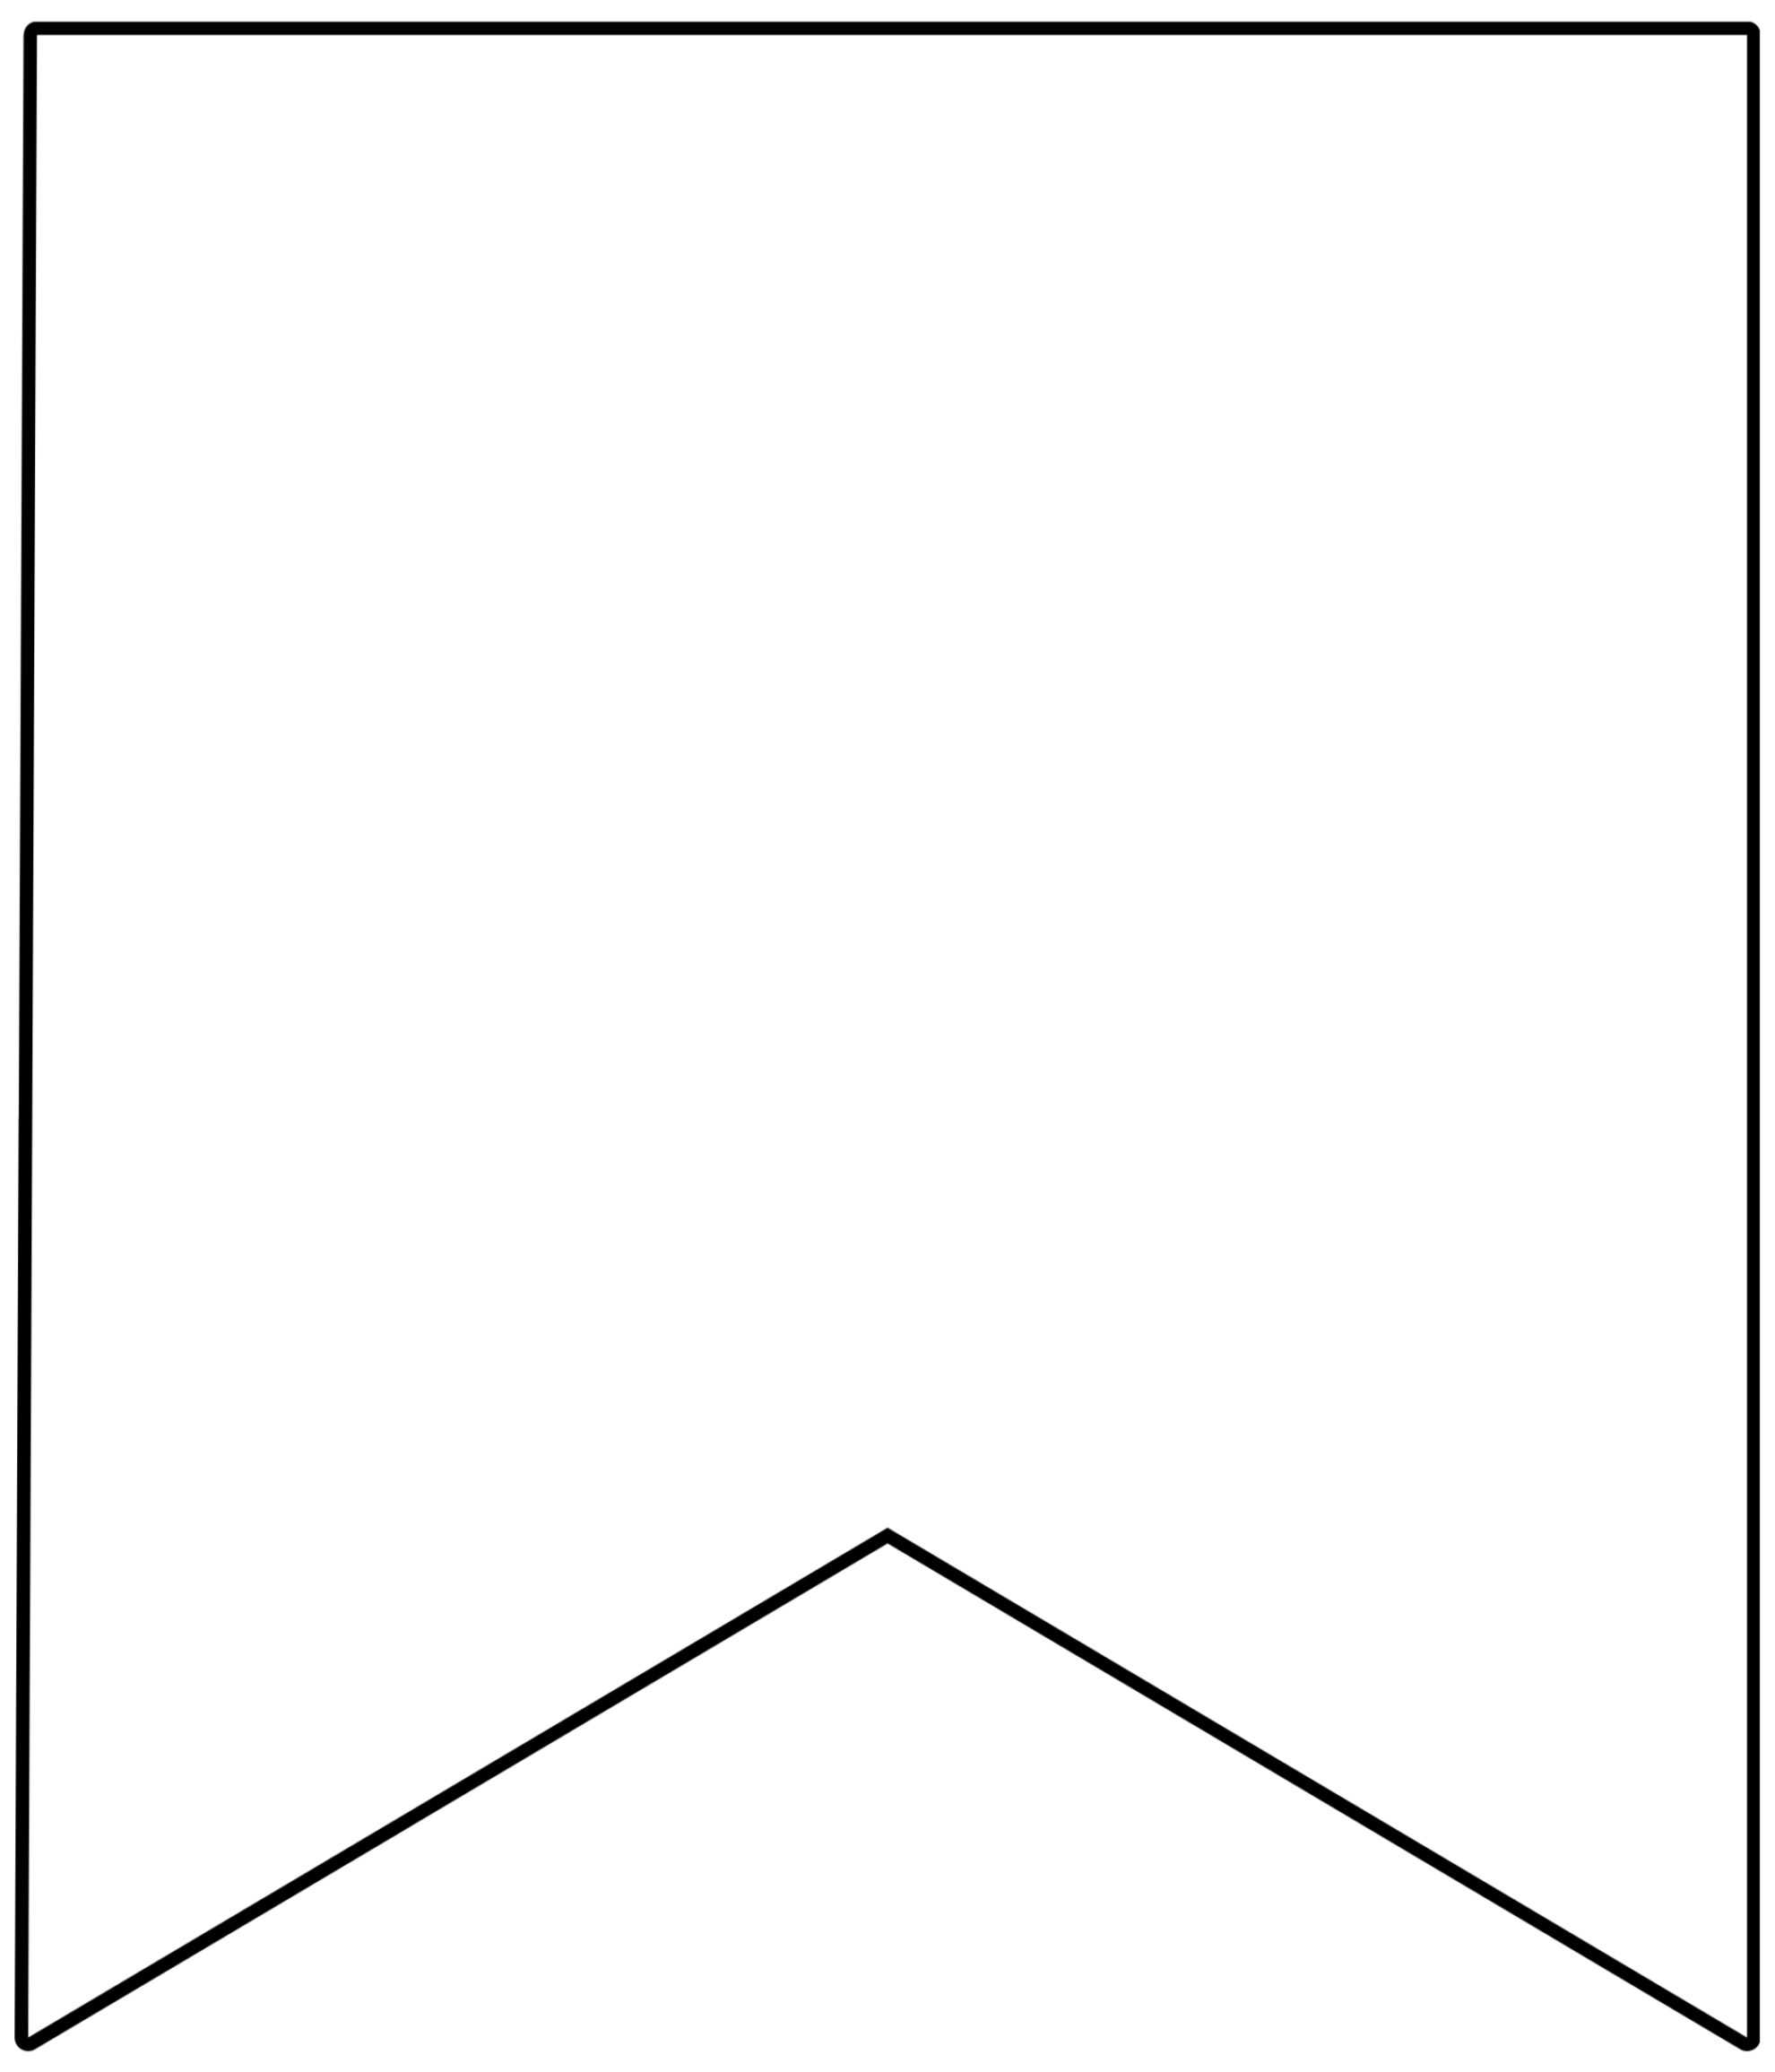 Free Printable Banner Templates {Blank Banners} - Paper Within Triangle Pennant Banner Template